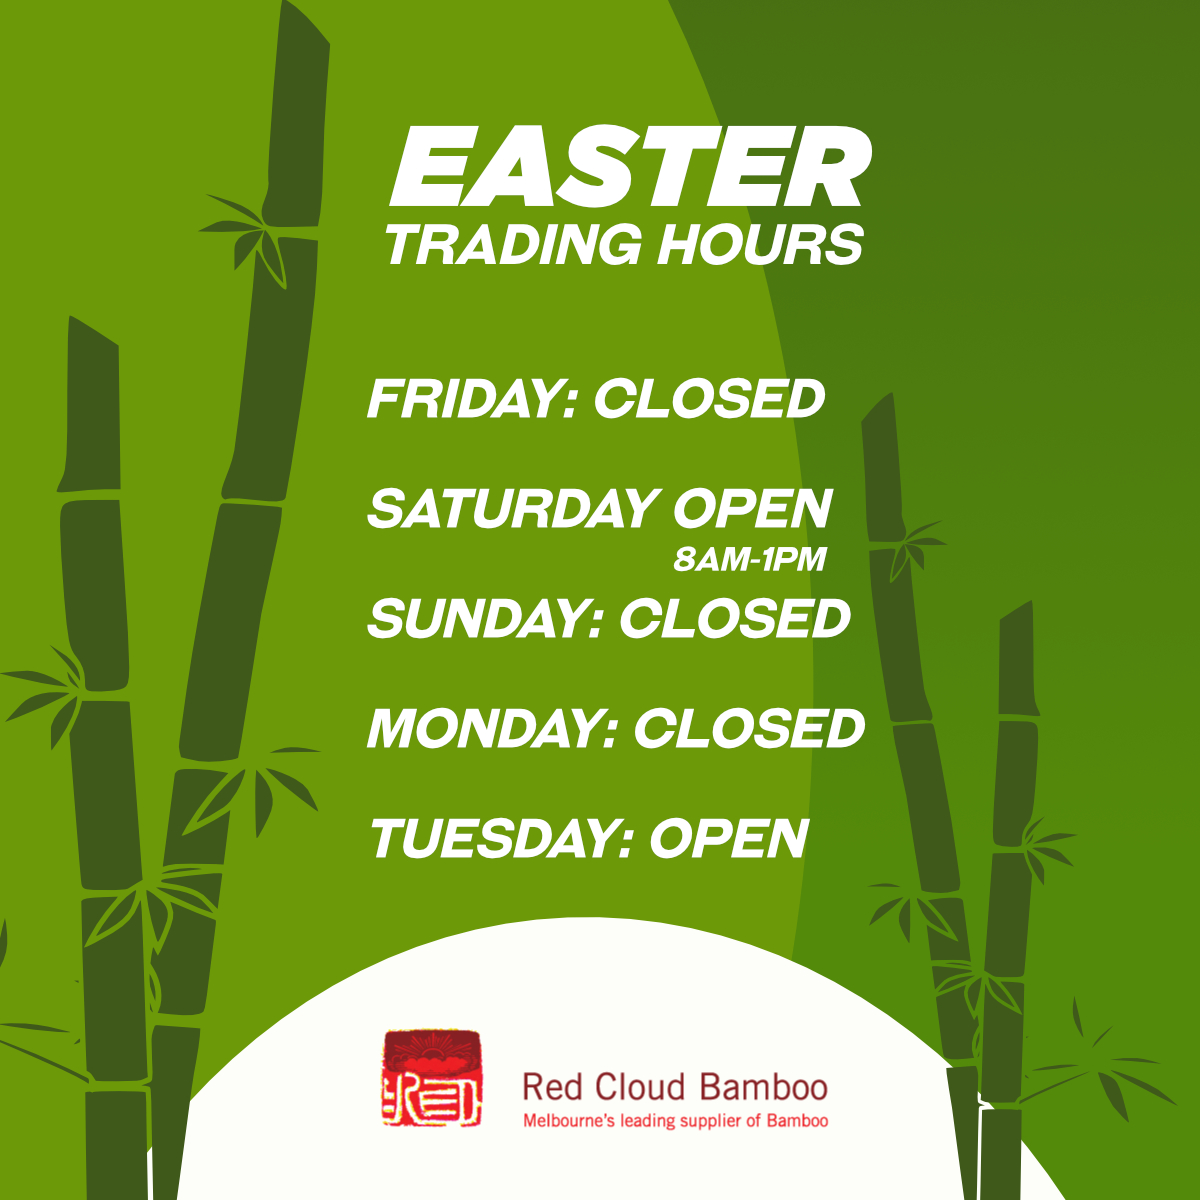 🌿 Red Cloud Bamboo Easter Trading Hours🌿

🔴 Closed Friday
🌟 Open Saturday: 8 AM - 1 PM 🌟
🔴 Closed Sunday 
🔴 Closed Monday 

We'll be back in action as usual starting Tuesday and throughout the rest of the week! 🎋

Mark your calendars and swing by to explore our beautiful bamboo collection! 
See you soon! 🌿 #RedCloudBamboo #BambooLovers #bamboo  #melbourne #landscapedesign